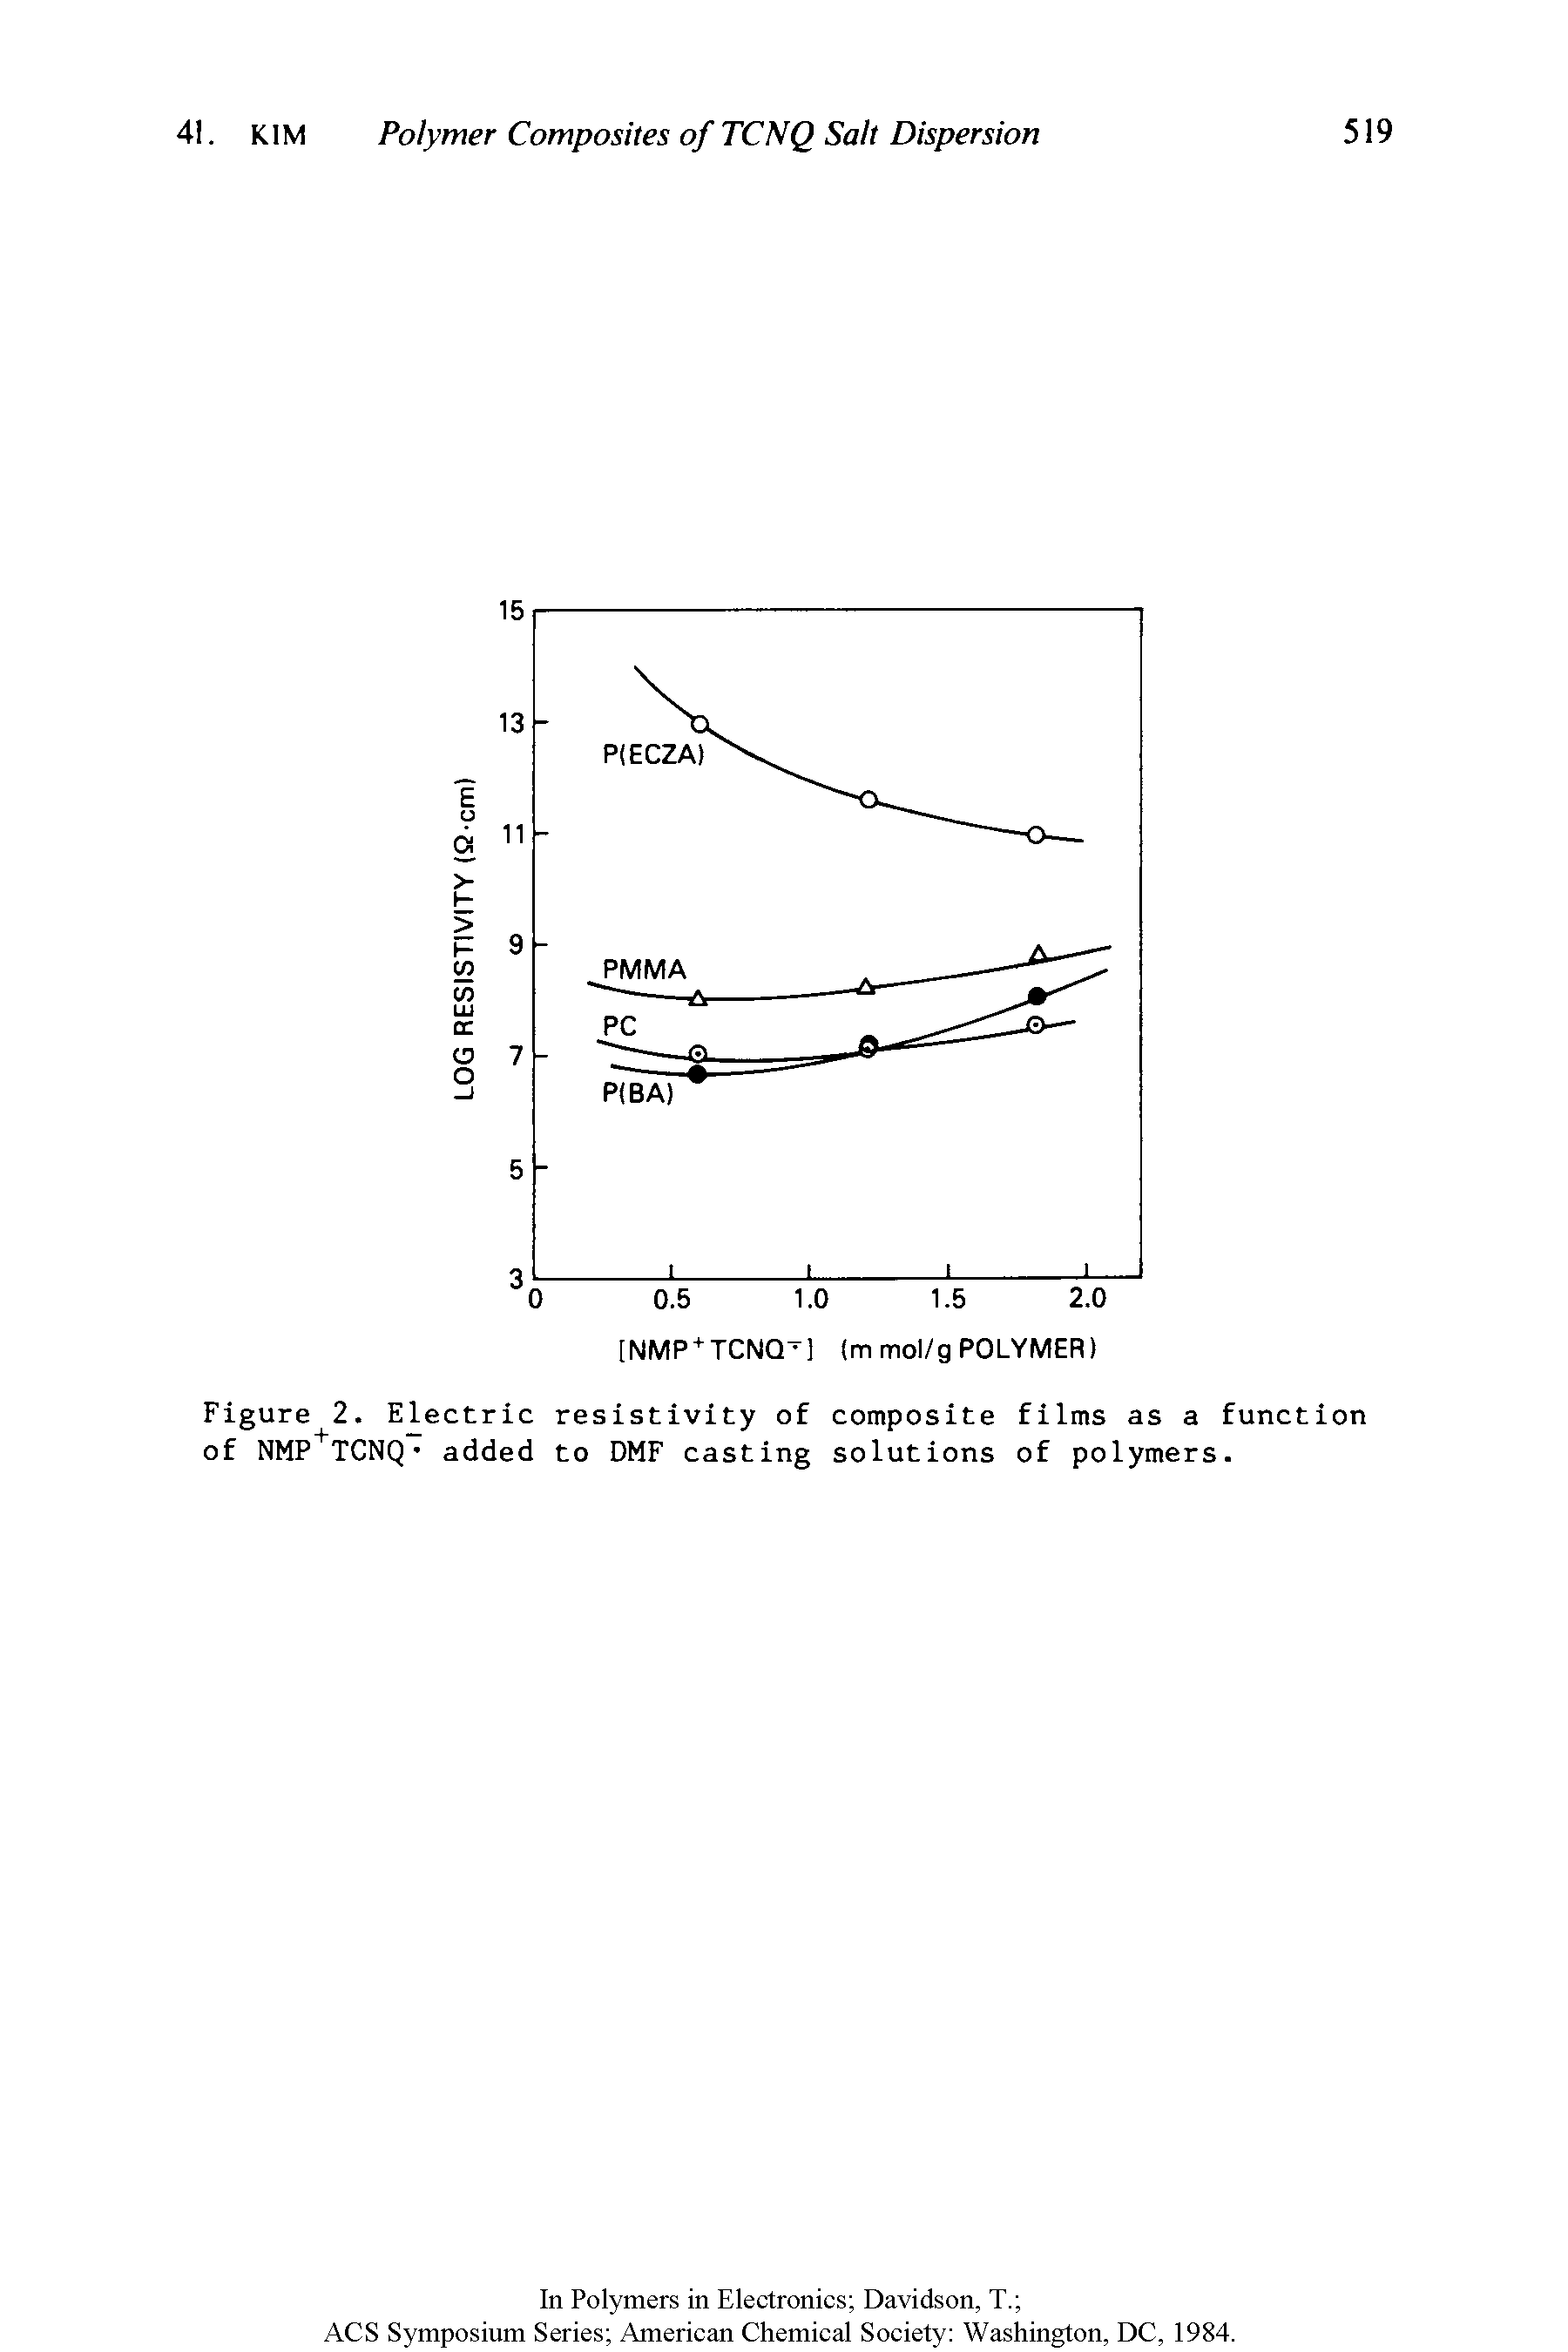 Figure 2. Electric resistivity of composite films as a function of NMP TCNQ- added to DMF casting solutions of polymers.